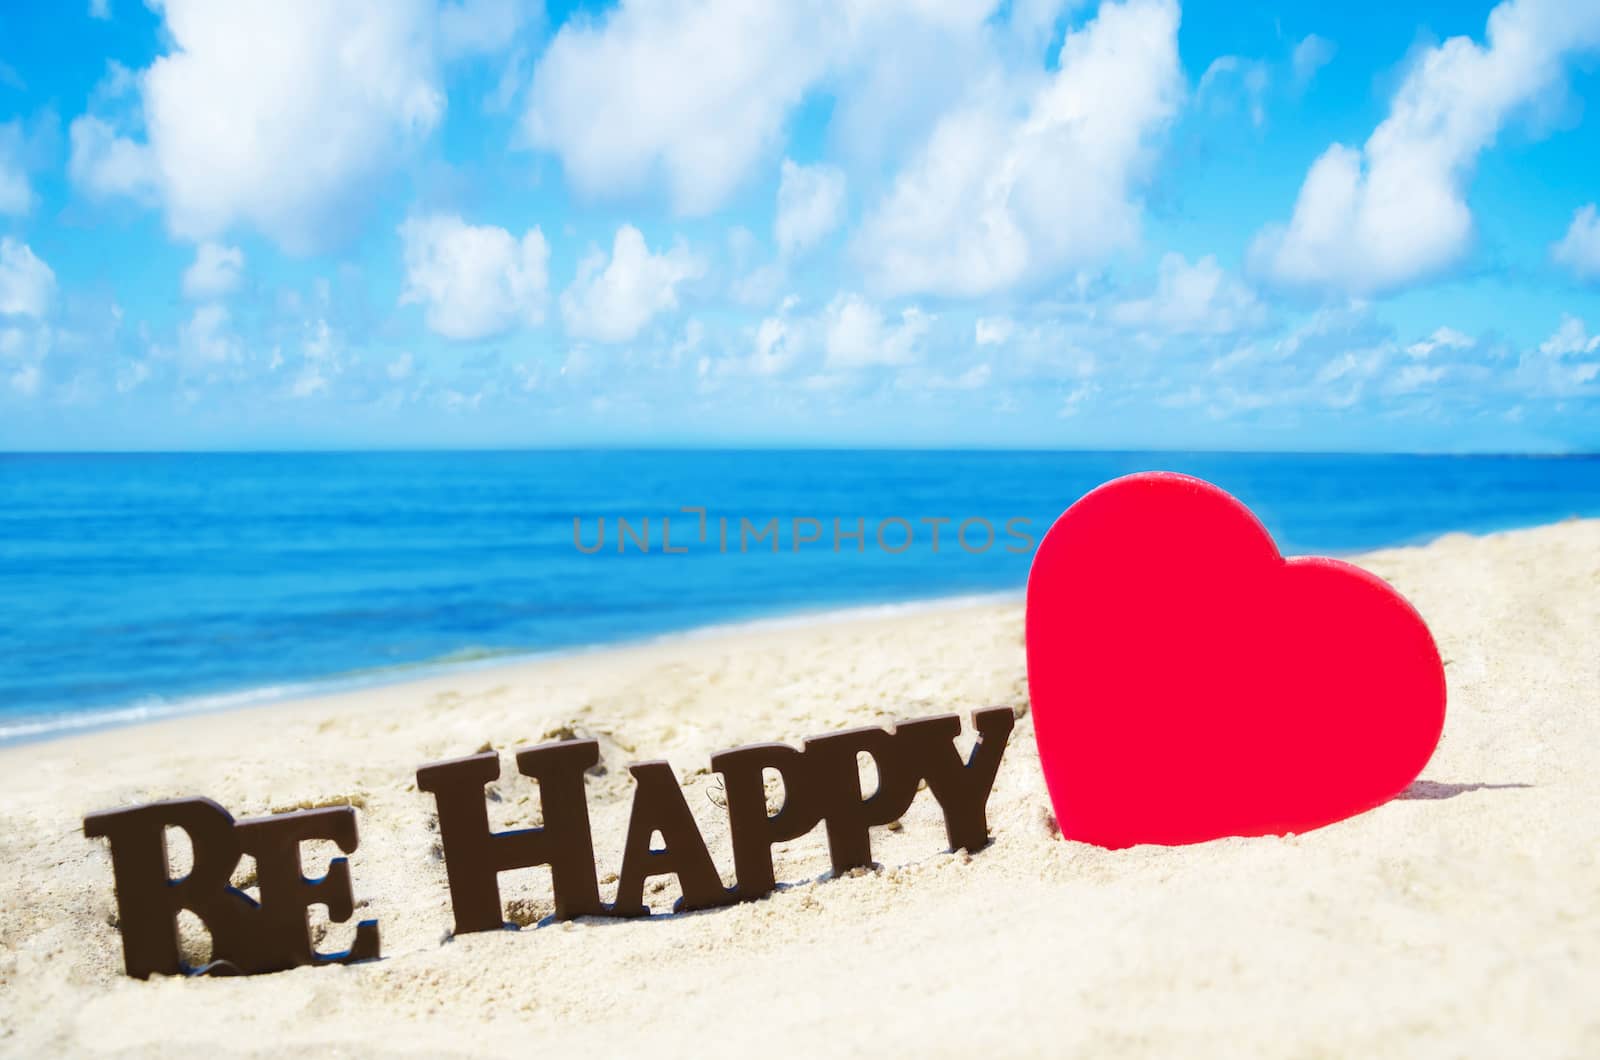 Sign "Be Happy" and heart shape on the sandy beach by the ocean in sunny day